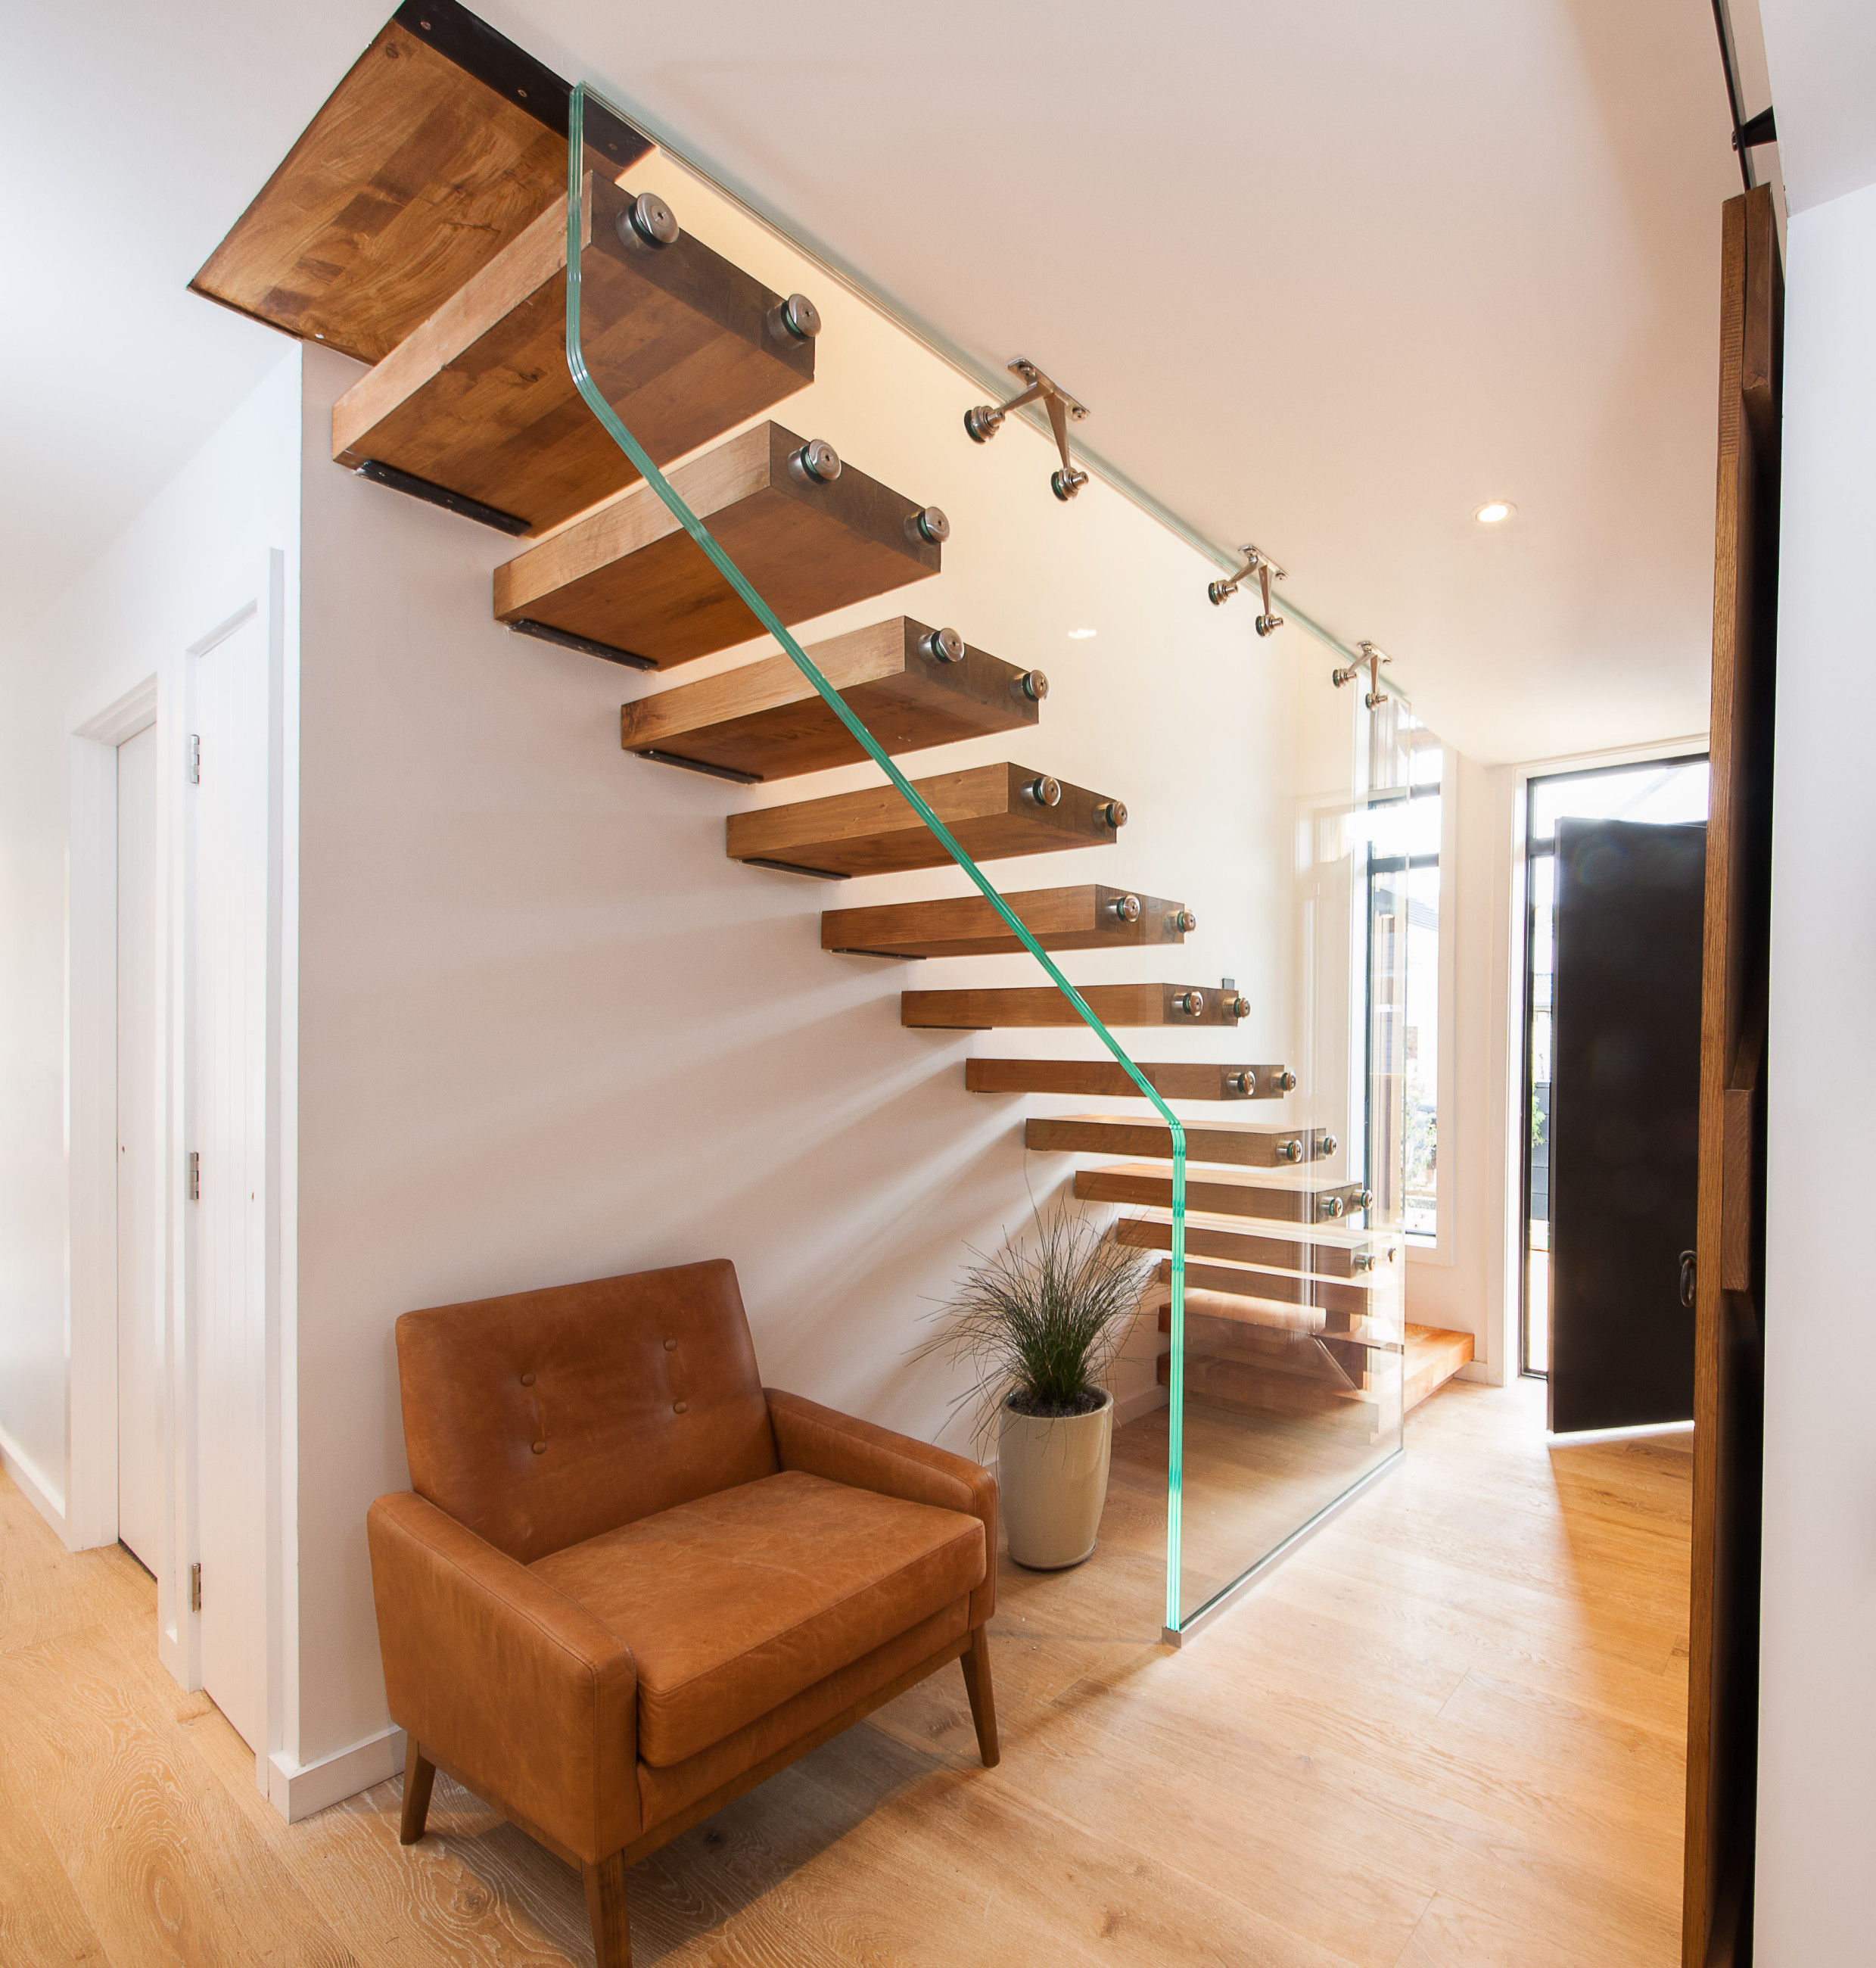 Glass balustrade with wooden stair and leather chair